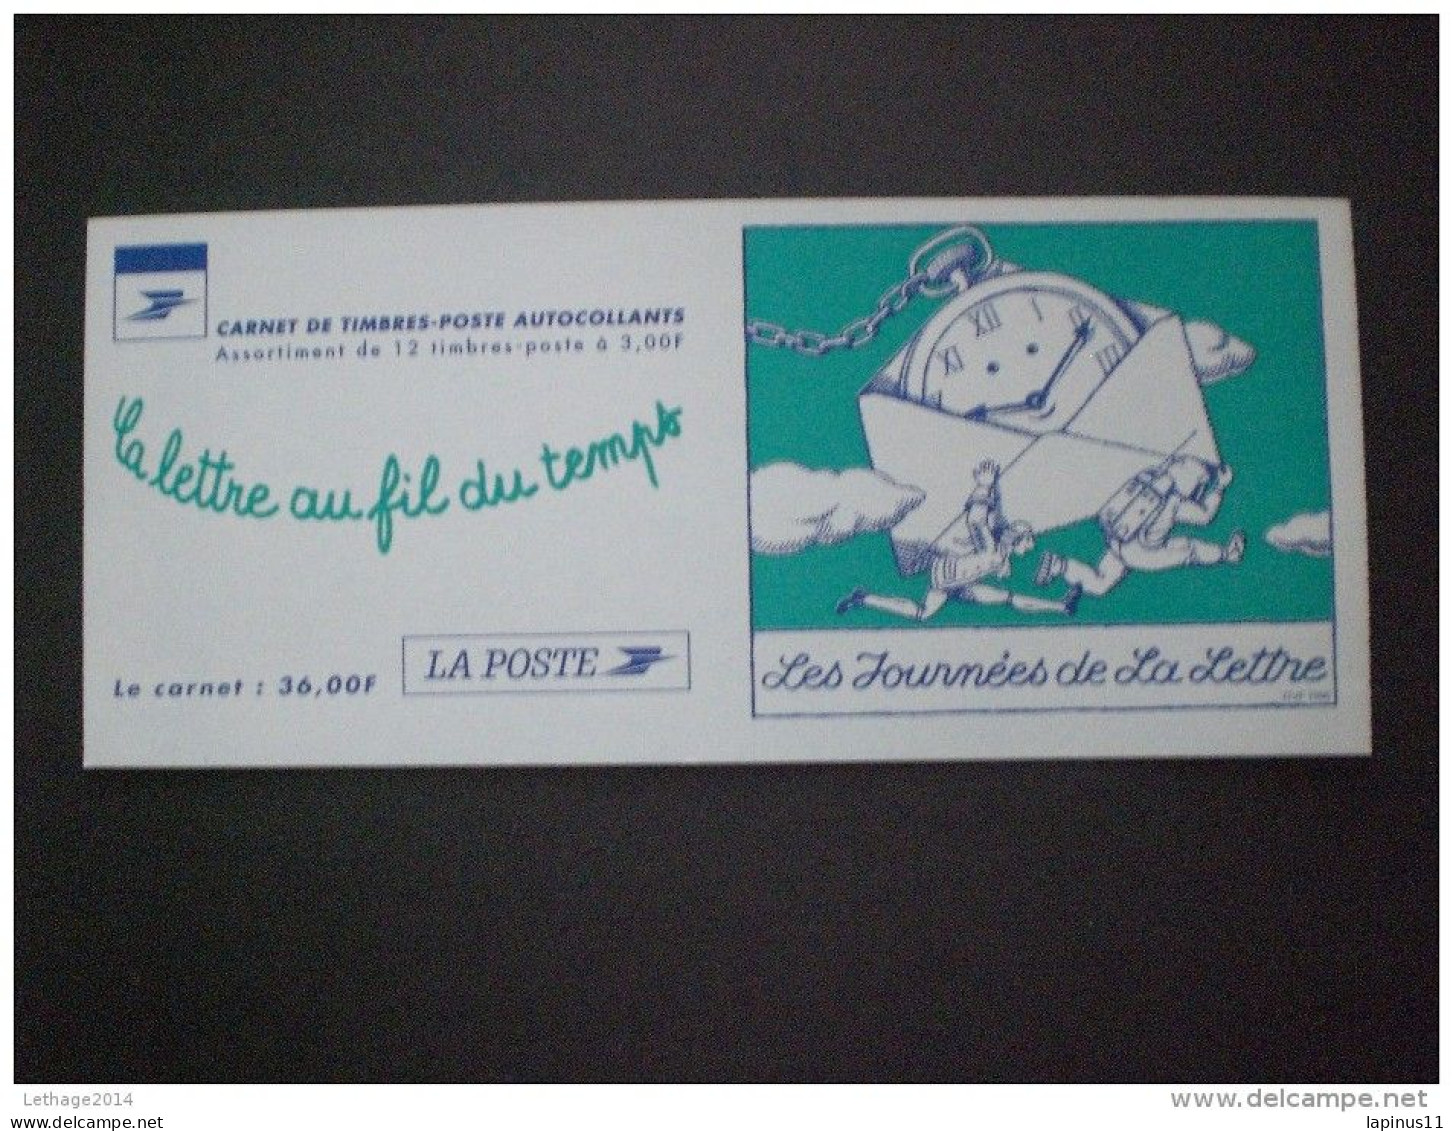 STAMPS France FRANCE CARNETS 1998 Postal Communication Through Times - Self-adhesive - Carnets